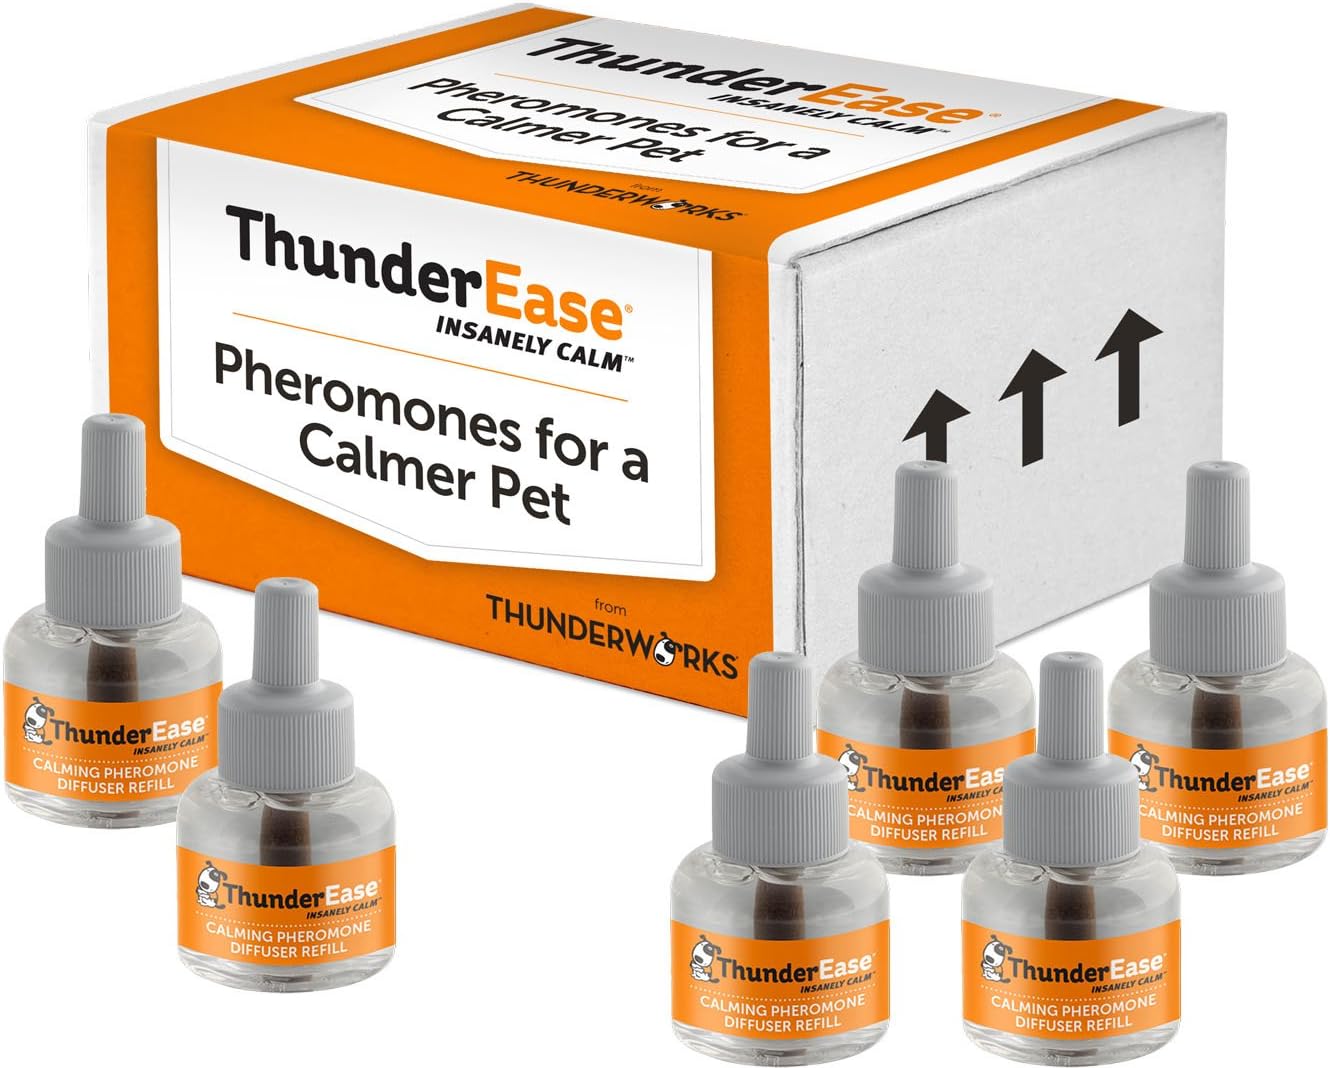 ThunderEase Dog Calming Pheromone Diffuser Refill | Powered by ADAPTIL | Vet Recommended to Relieve Separation Anxiety, Stress Barking and Chewing, and the Fear of Fireworks and Thunderstorms (180 Day